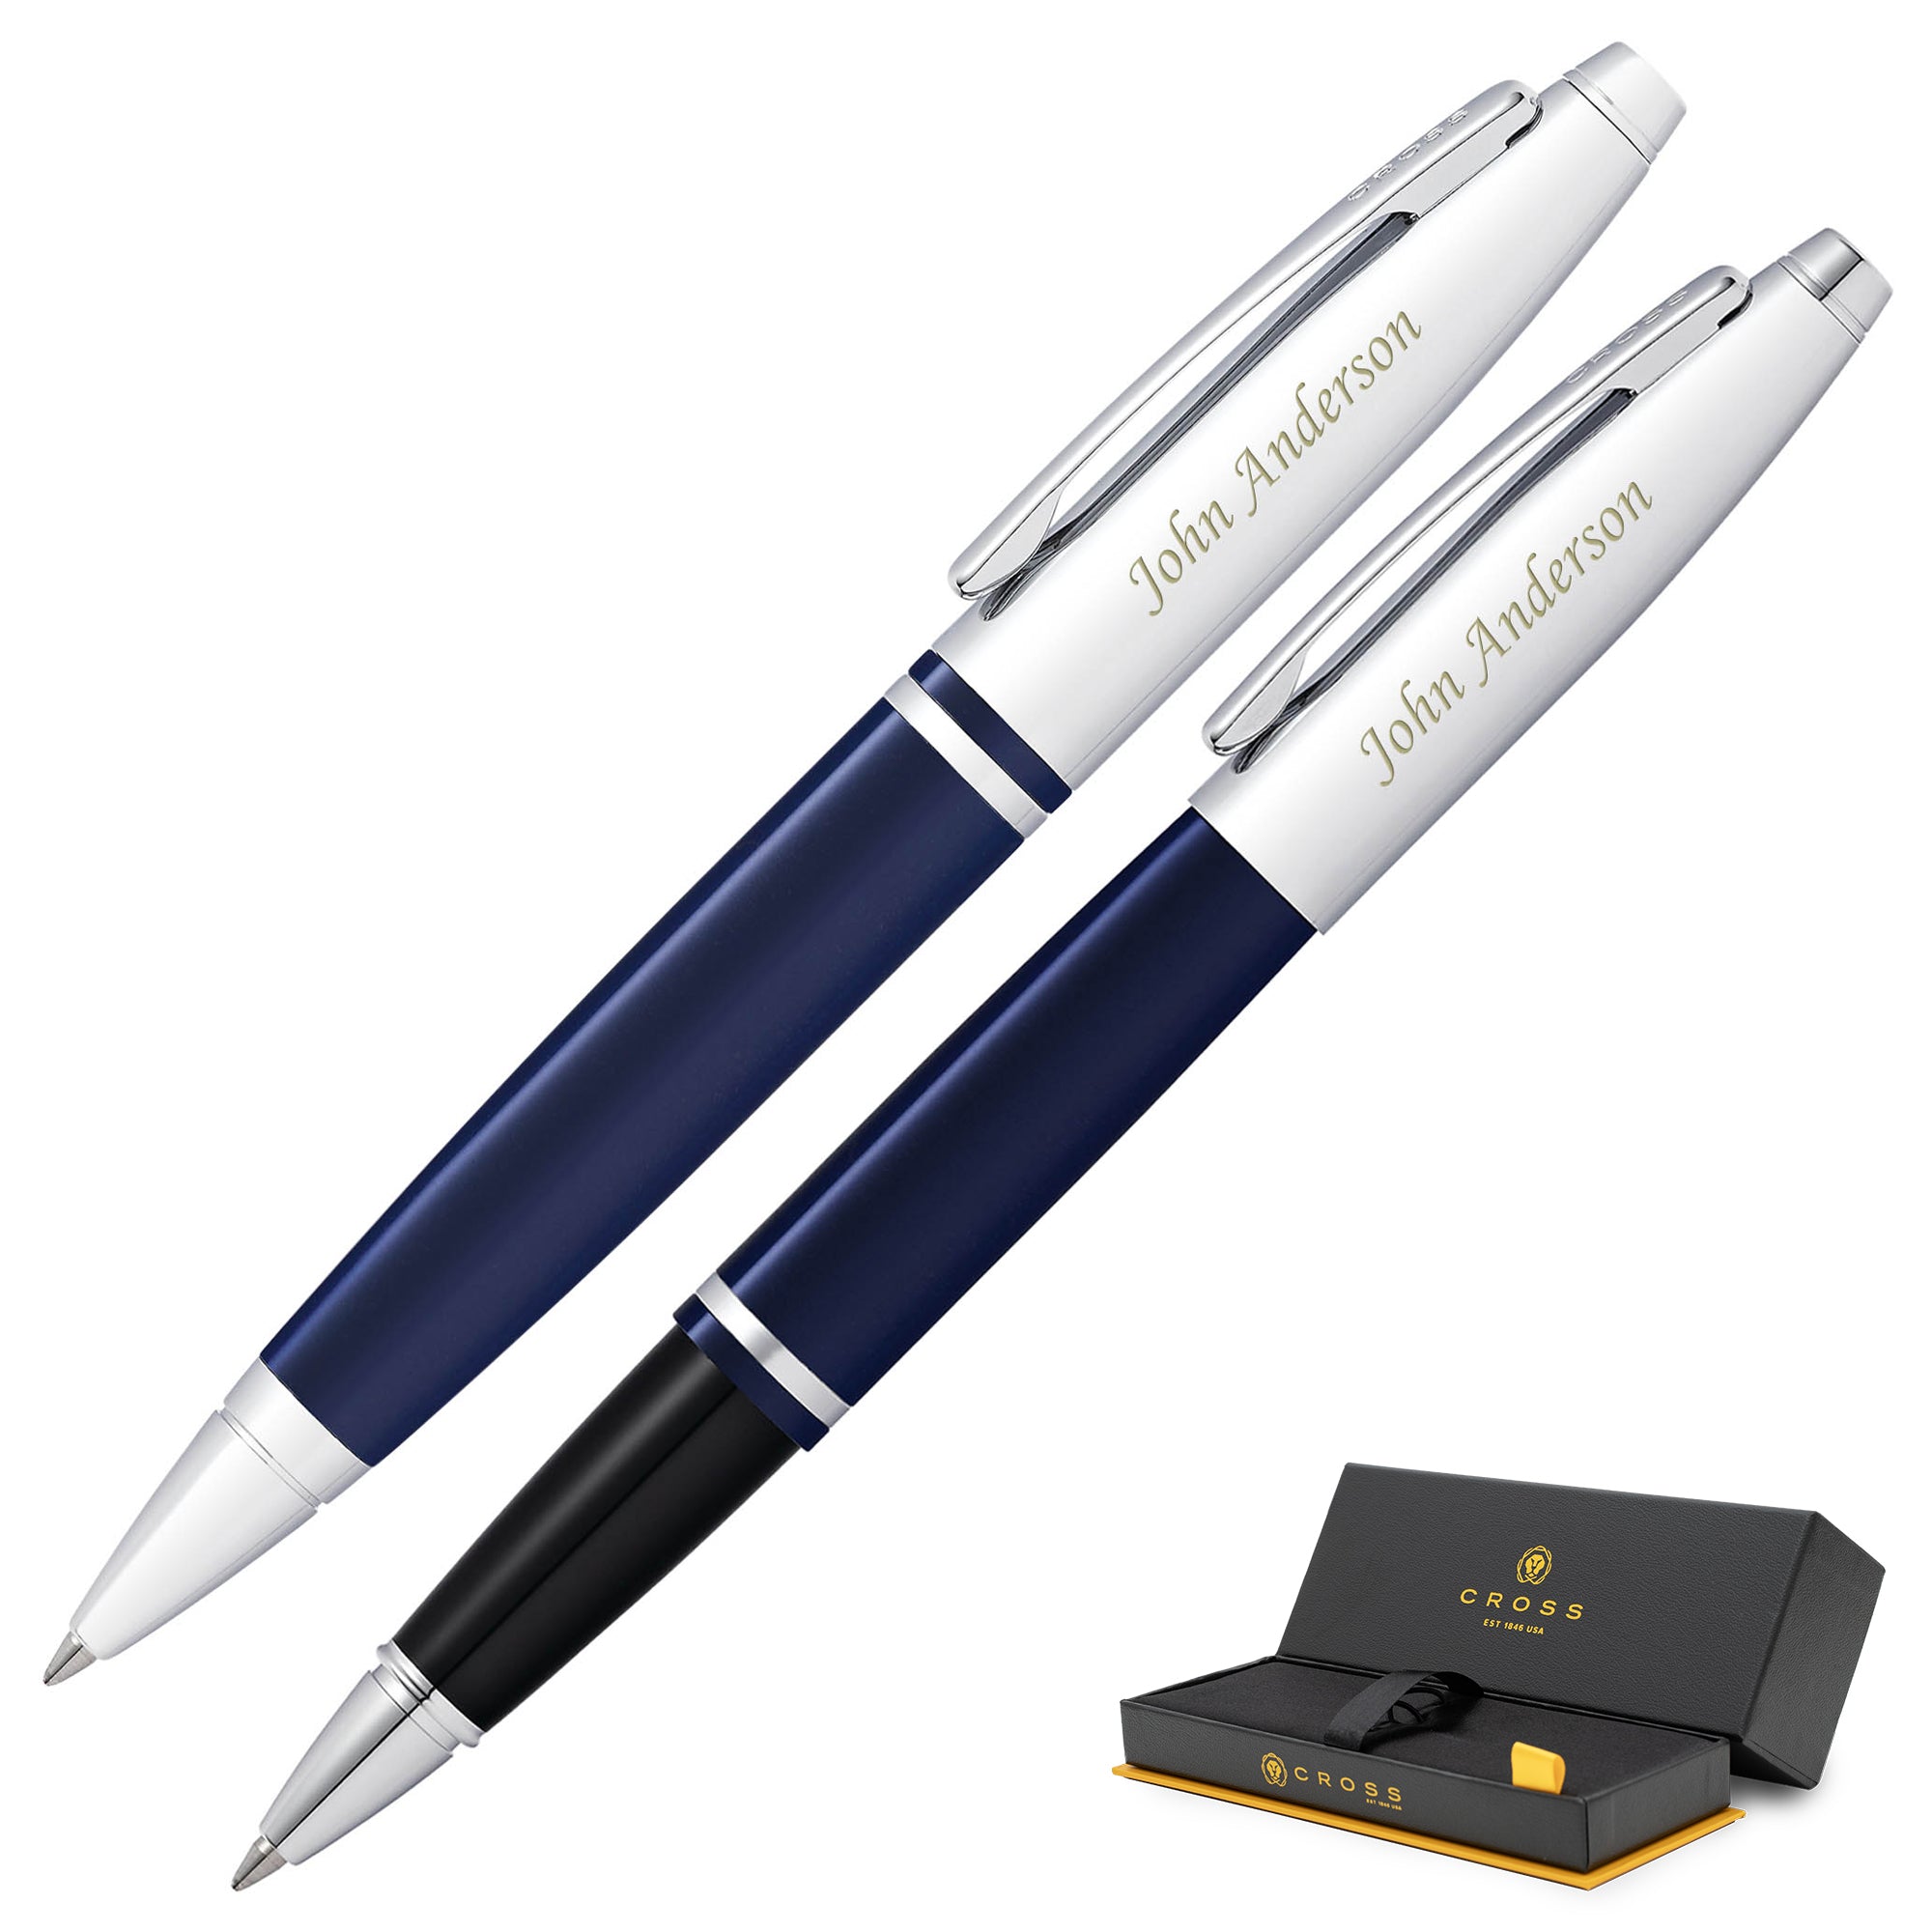 Best Ballpoint Pen Brands: From Budget to Luxury Choices - Dayspring Pens